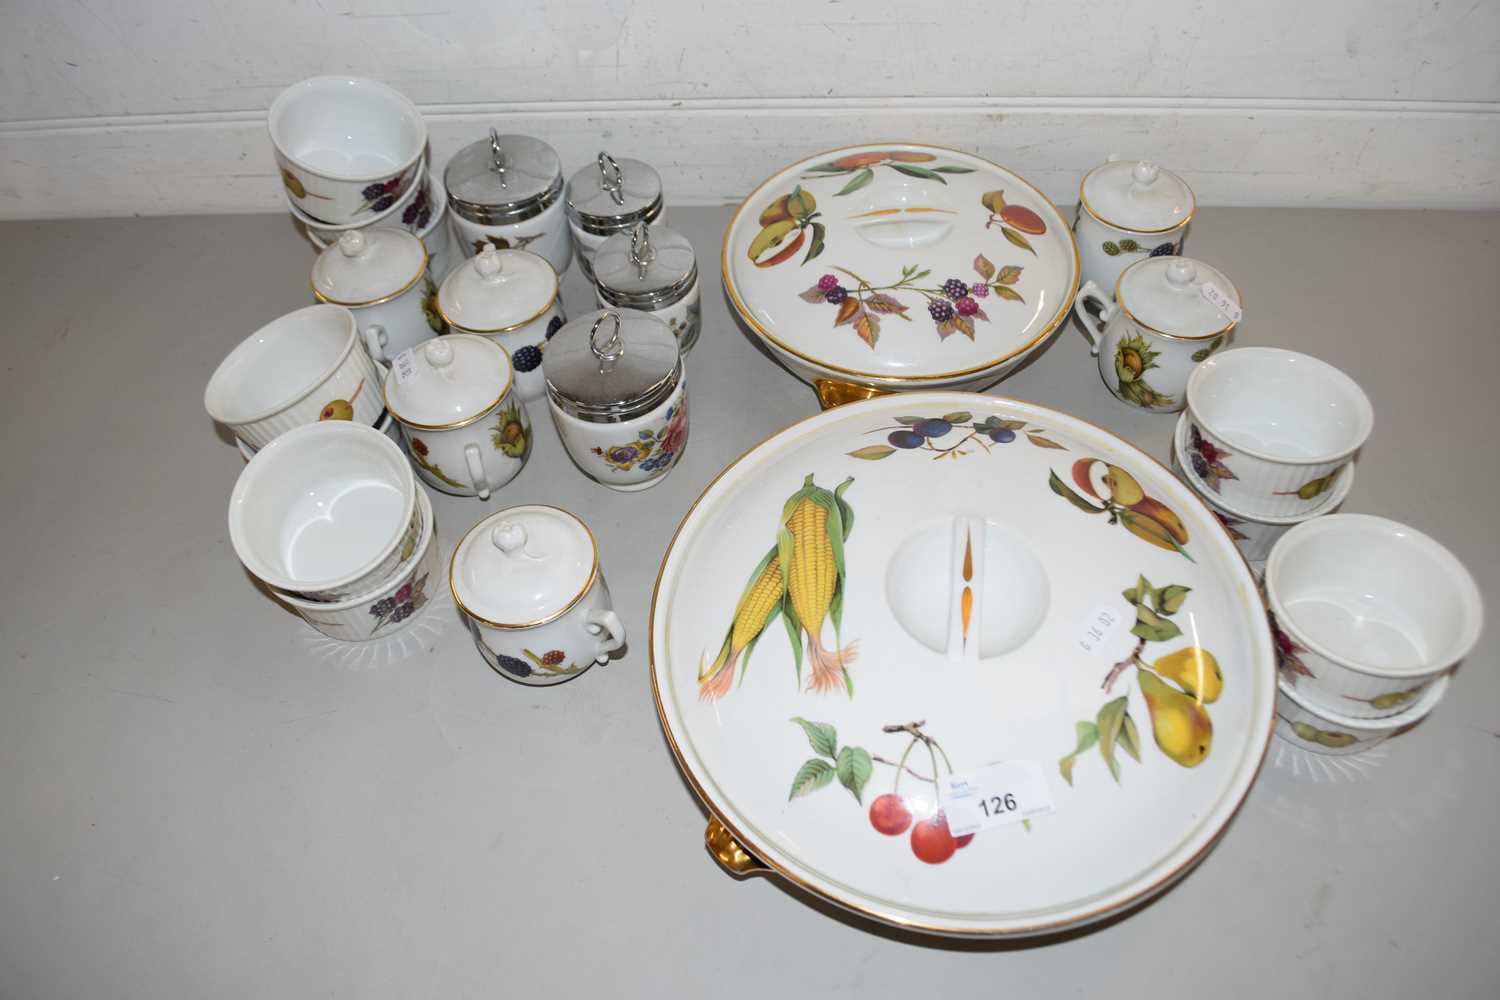 QUANTITY OF ROYAL WORCESTER, EVESHAM AND OTHER PATTERNED TABLE WARES TO INCLUDE COVERED VEGETABLE